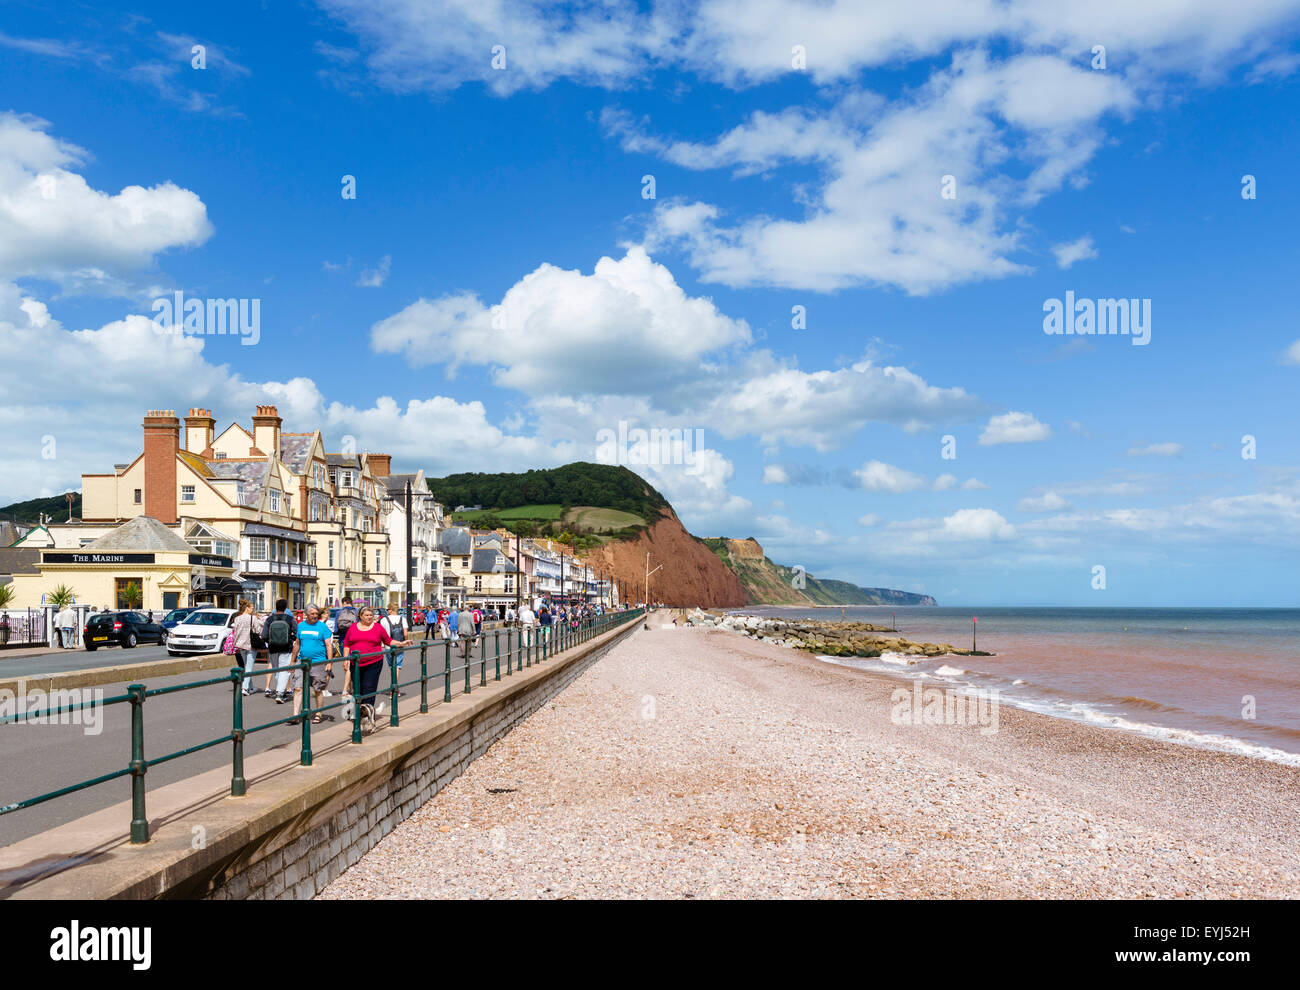 The Esplanade and beach in Sidmouth, Devon, England, UK Stock Photo